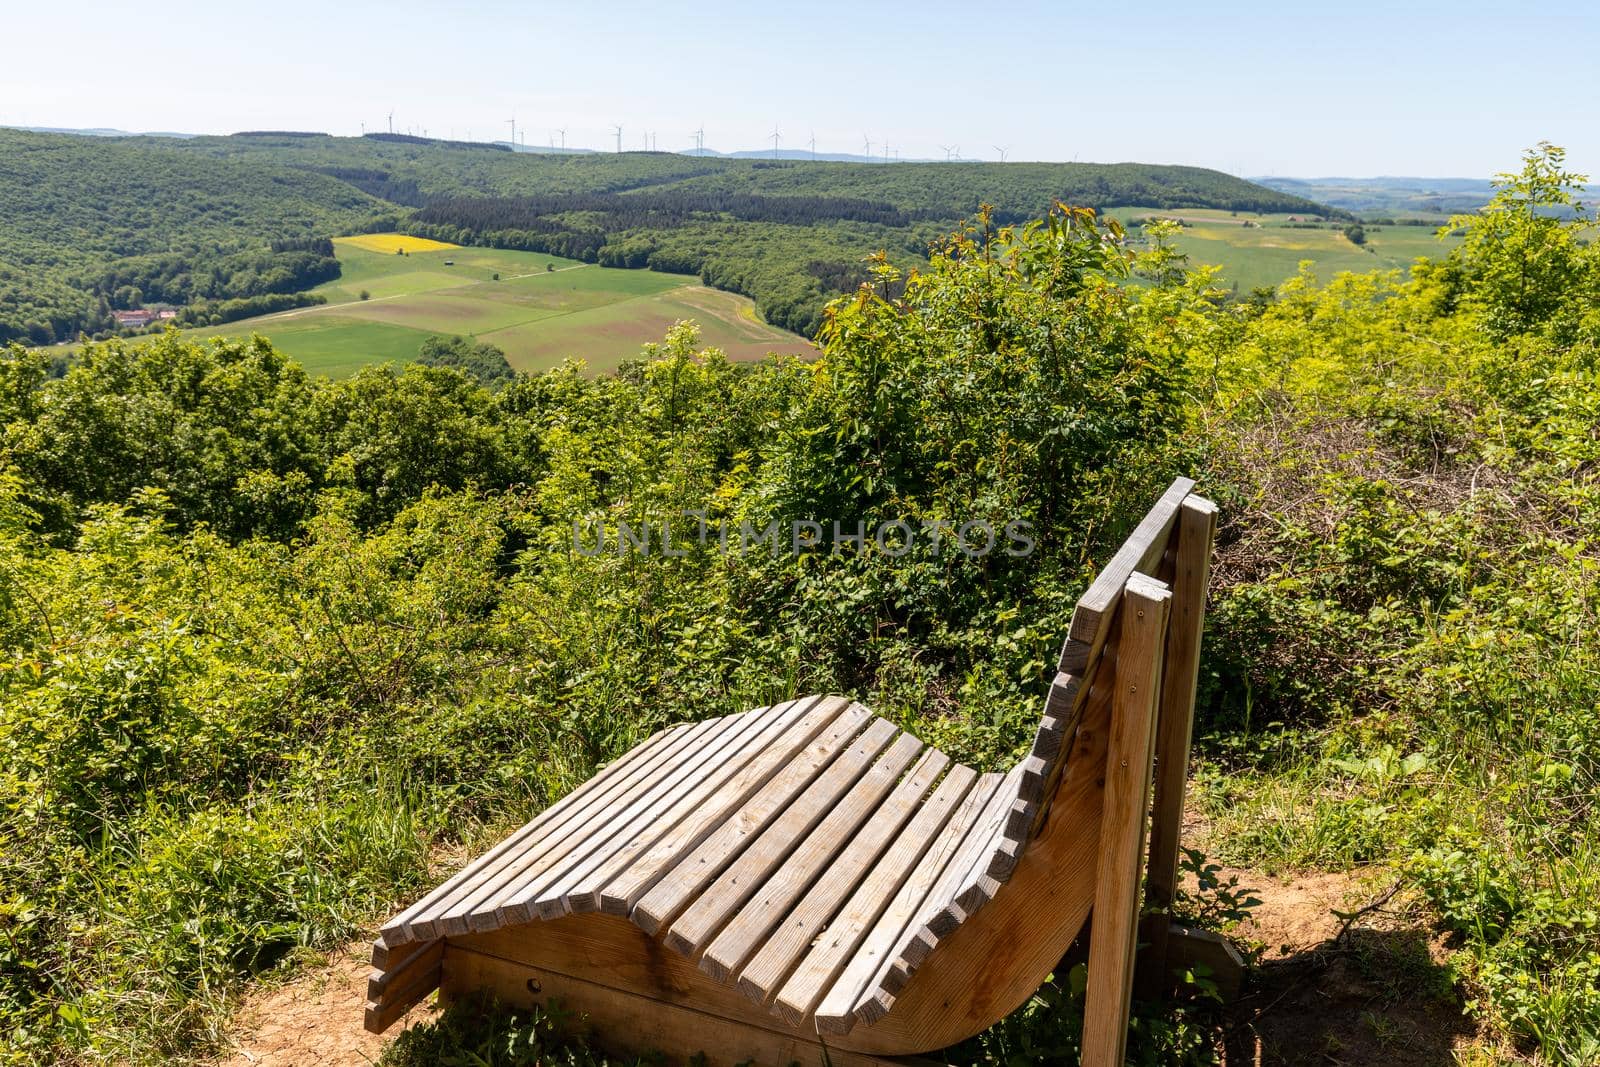 Scenic view from the Lemberg at landscape with  wooden relaxing bench in the foreground